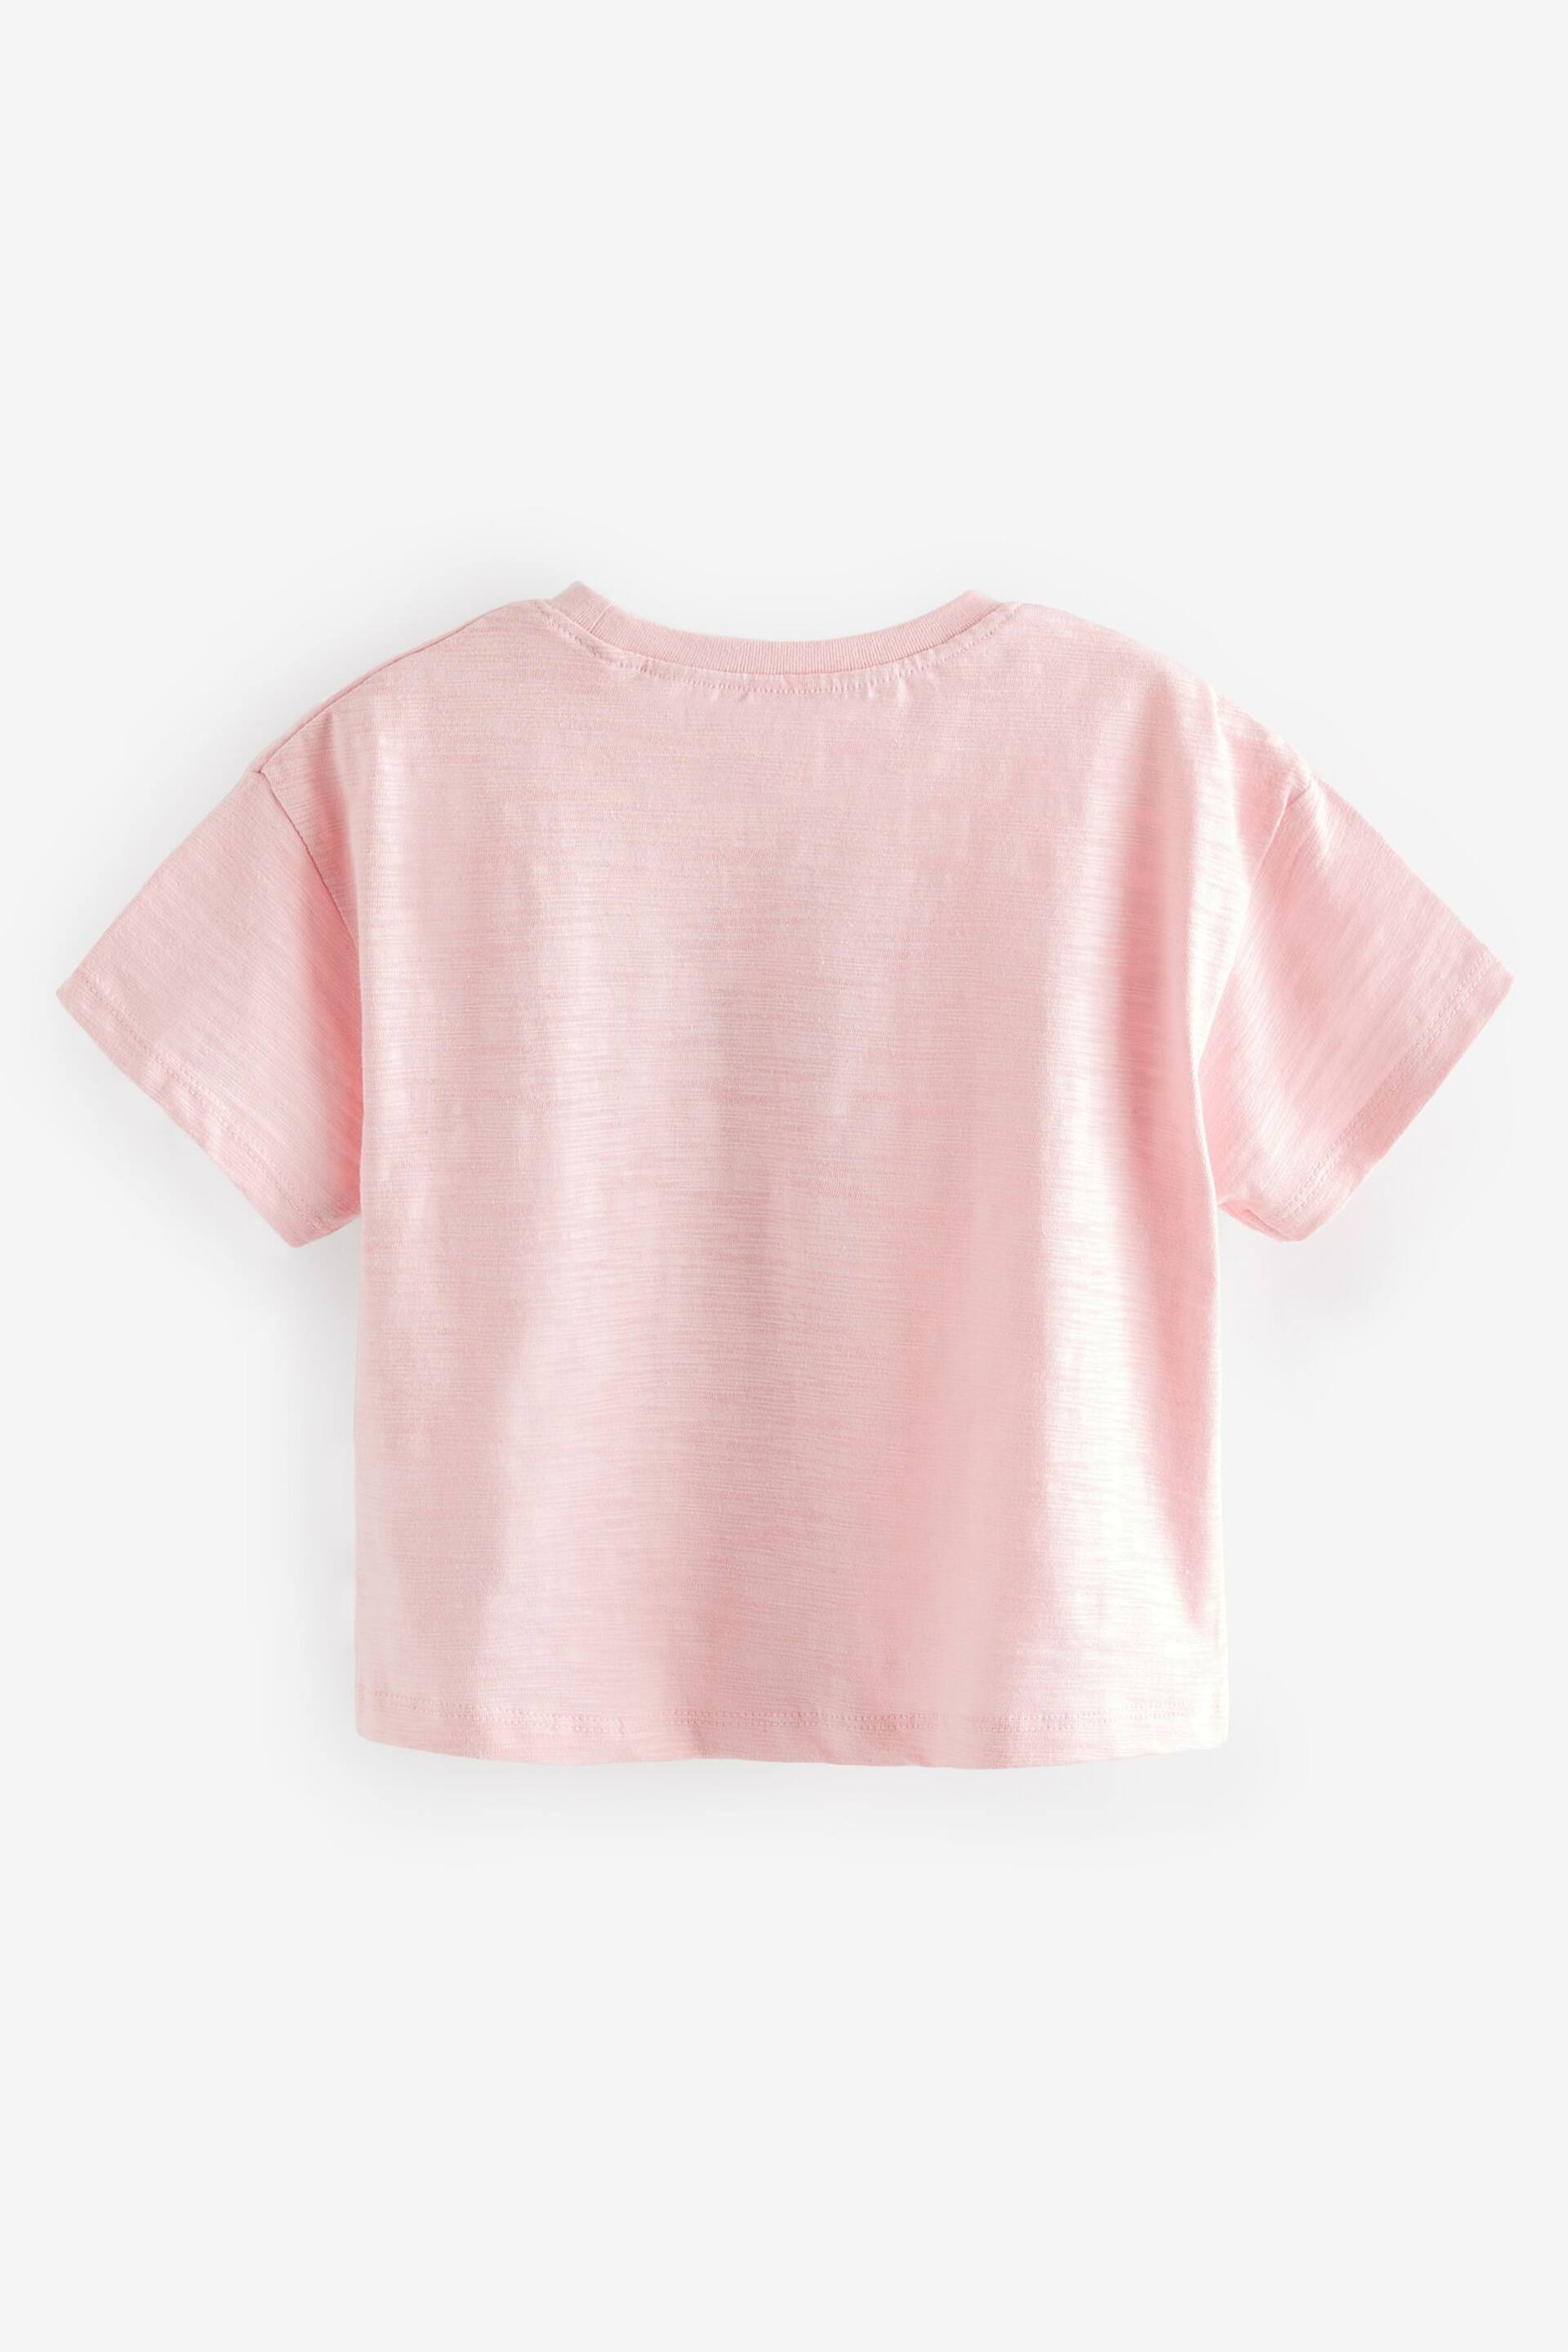 Pink Happy Vibes Short Sleeve T-Shirt (3mths-7yrs) - Image 6 of 7